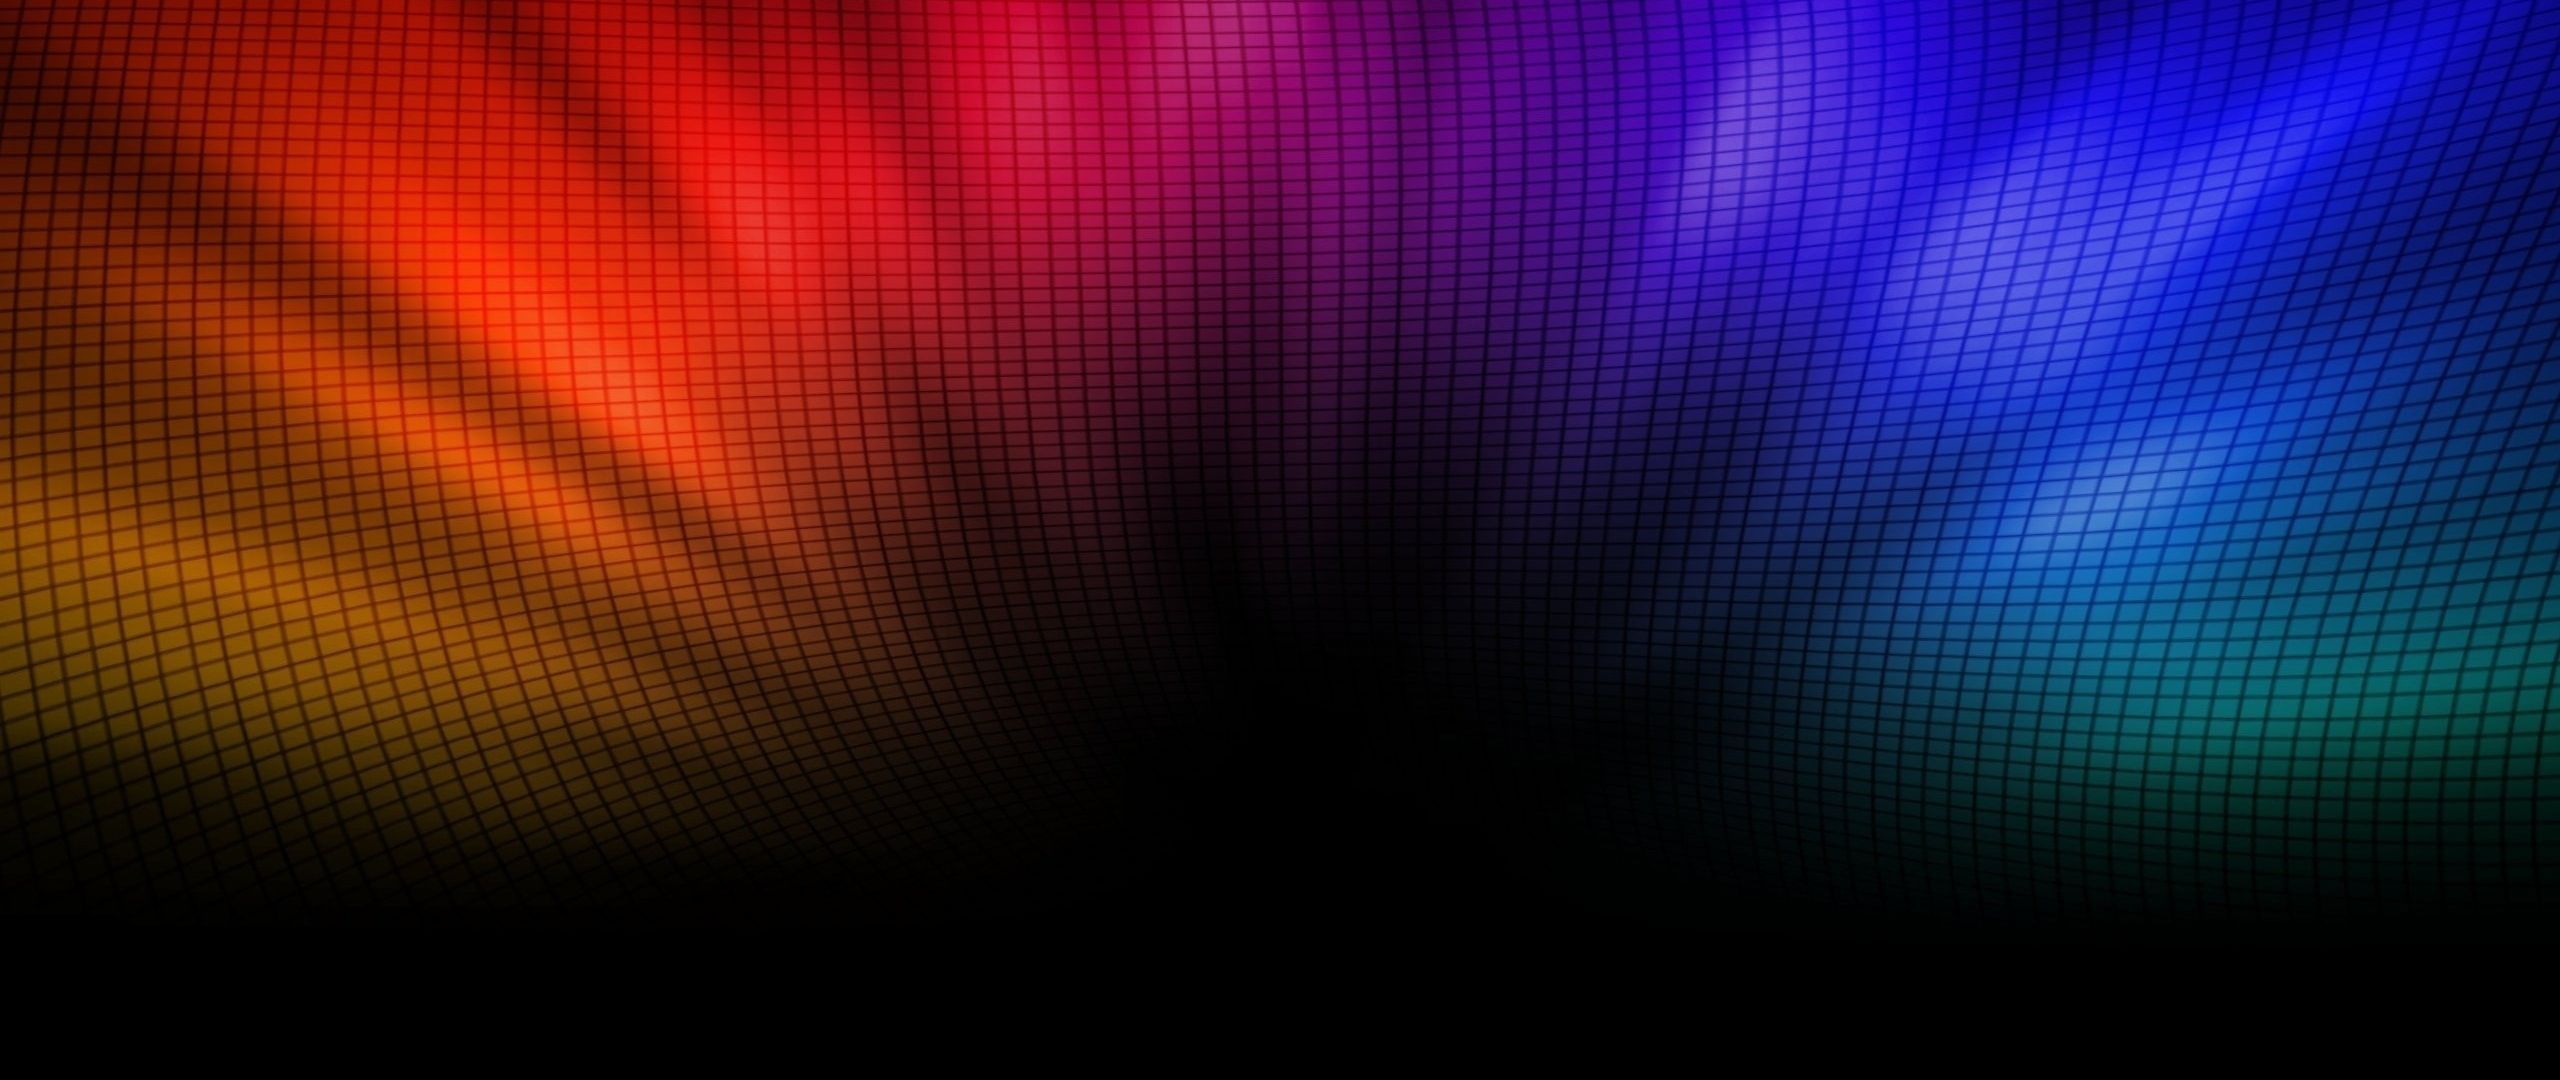 Download Wallpaper 2560x1080 Colorful, Background, Point 2560x1080